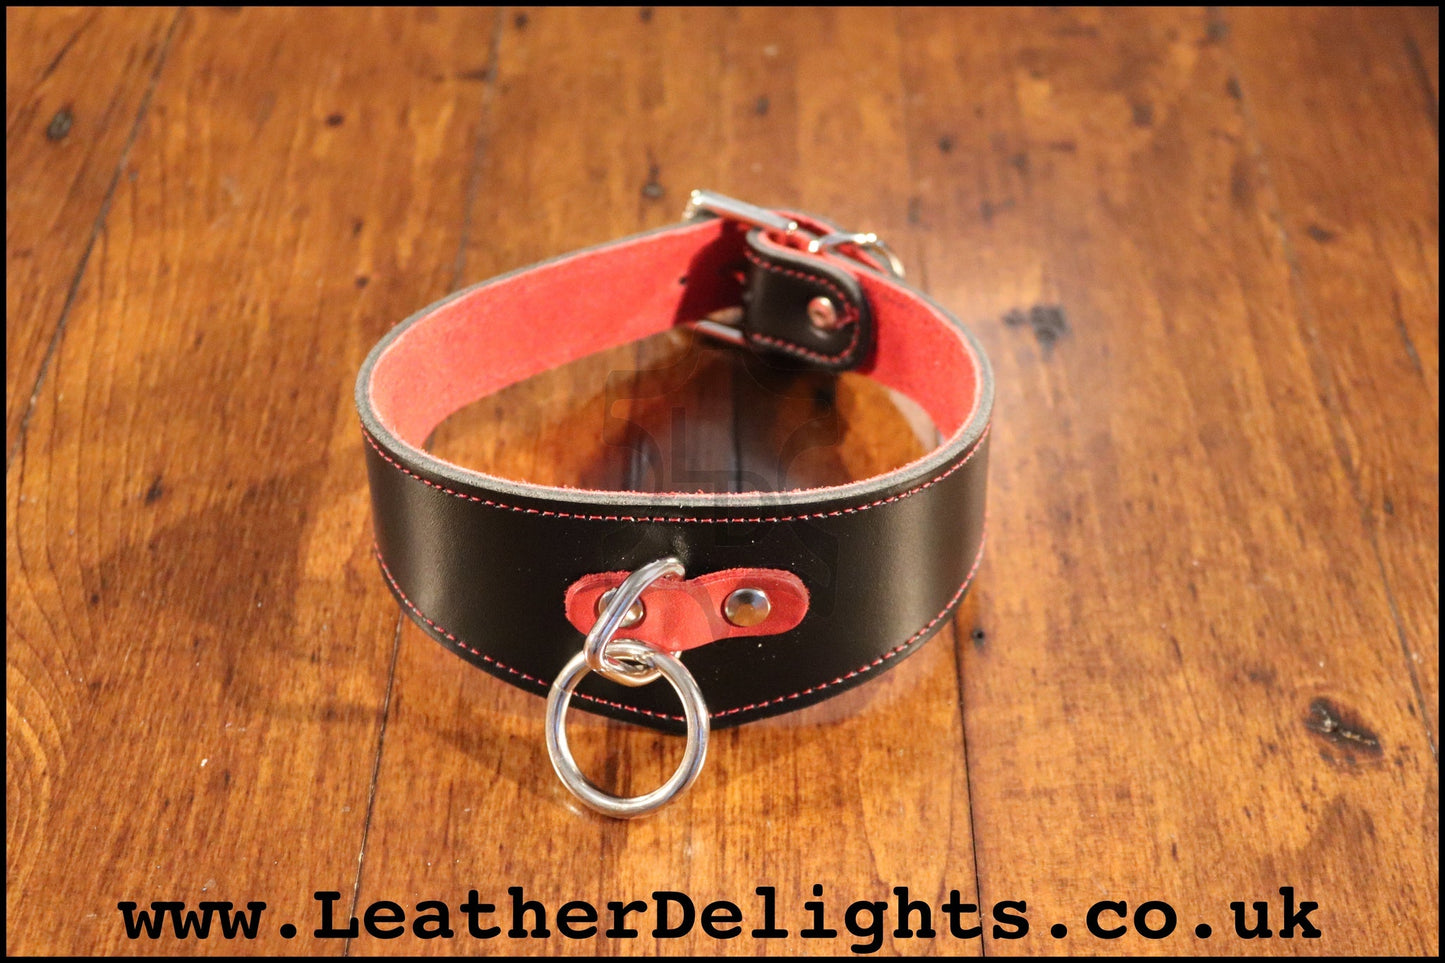 Simple Dress Collar - Leather Delights